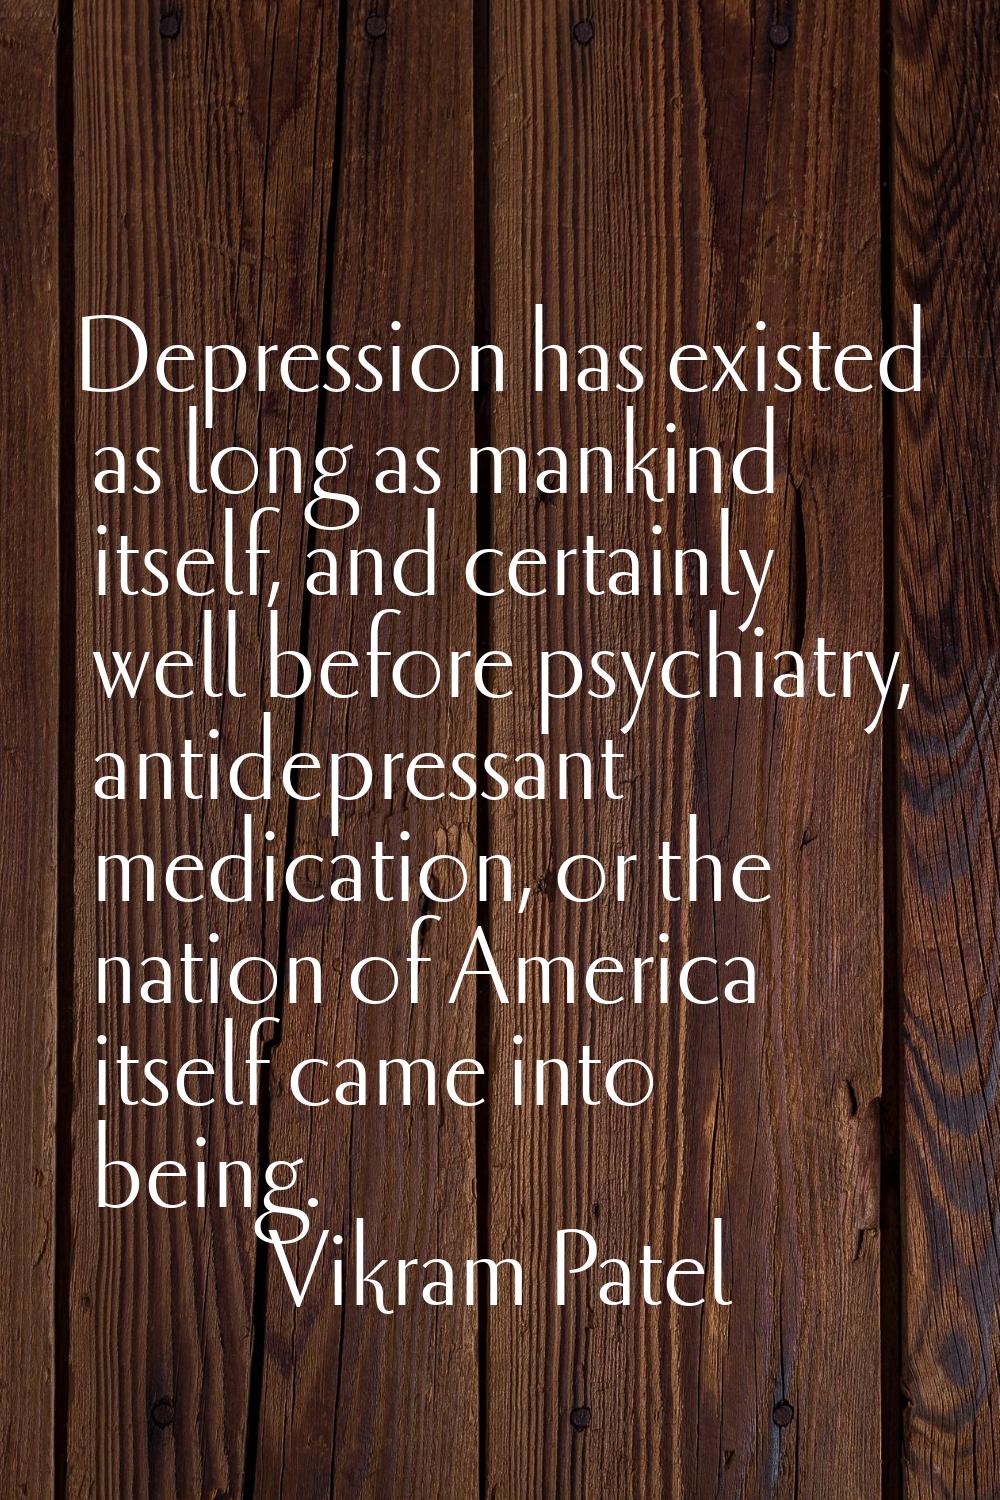 Depression has existed as long as mankind itself, and certainly well before psychiatry, antidepress